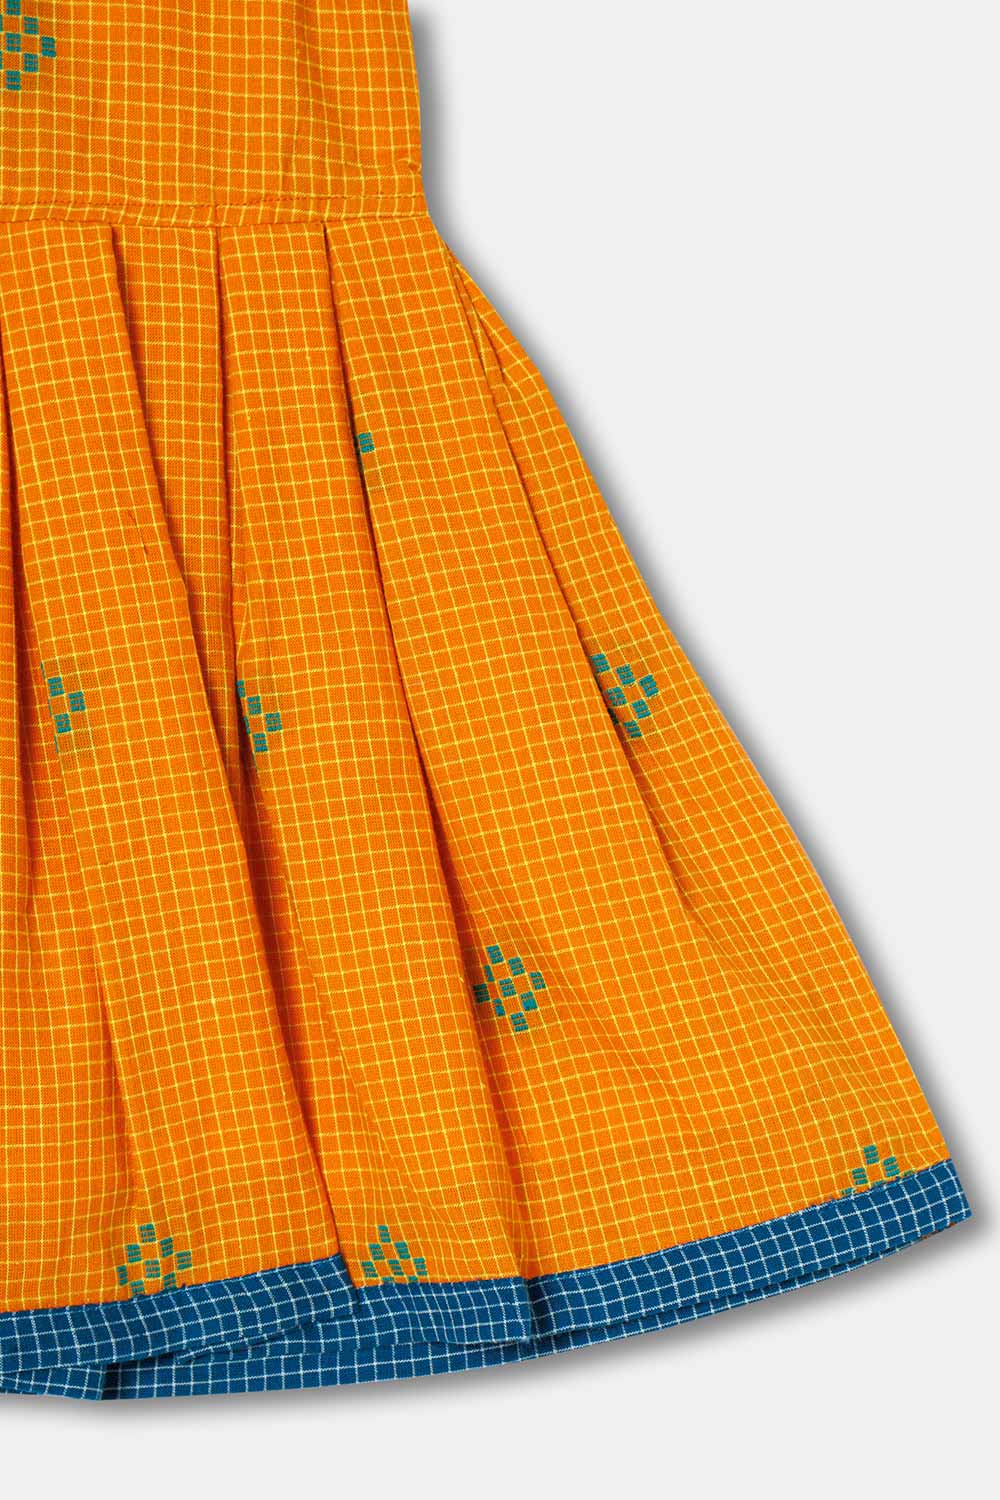 Chittythalli Girls Ethnic Wear Frock Handloom Cotton Relaxed Fit  - Yellow  - FR23